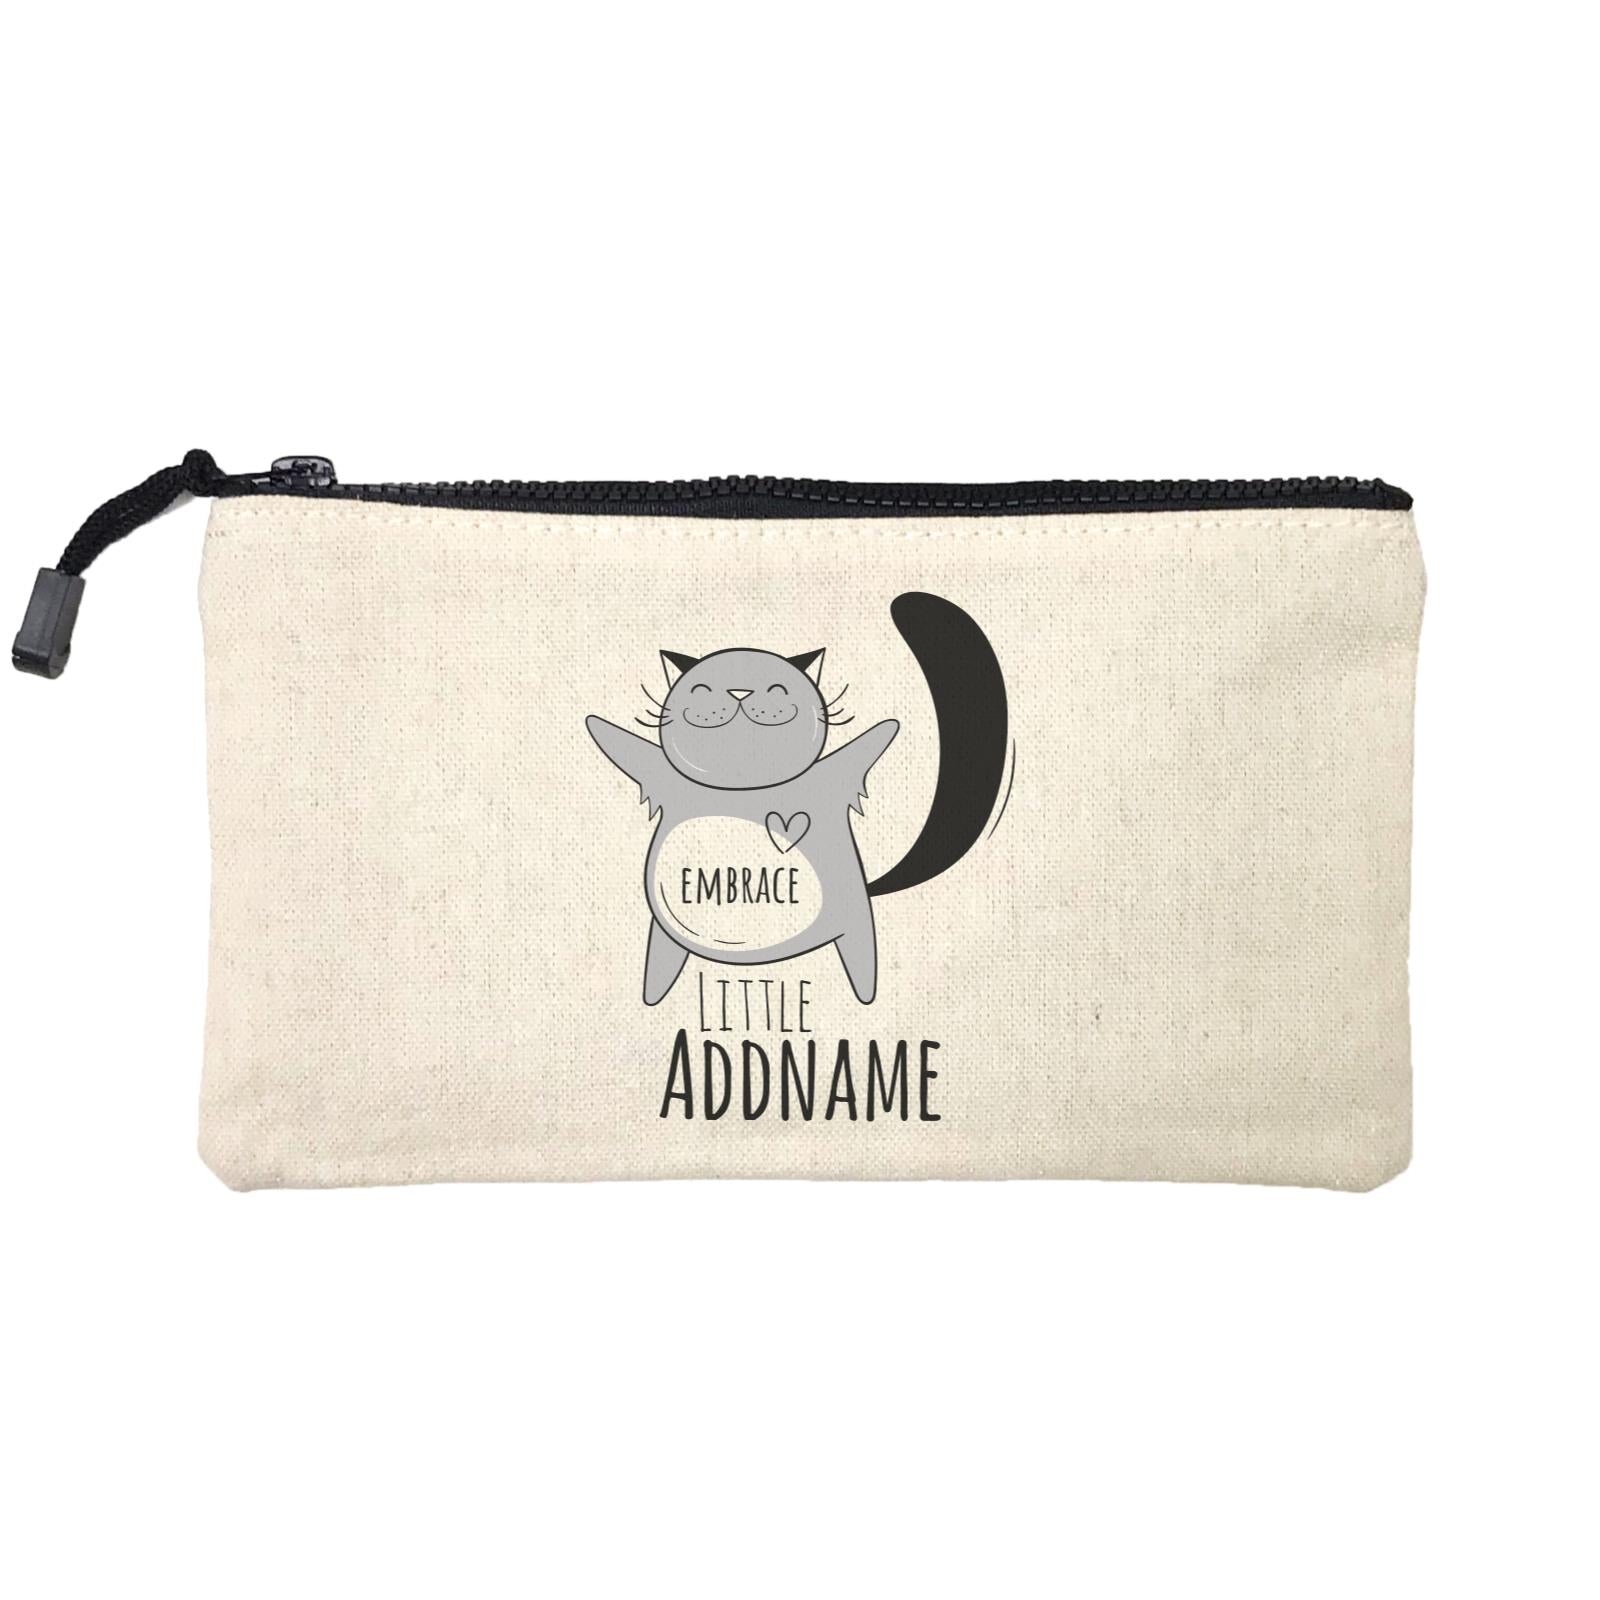 Drawn Adorable Animals Embrace Addname Mini Accessories Stationery Pouch